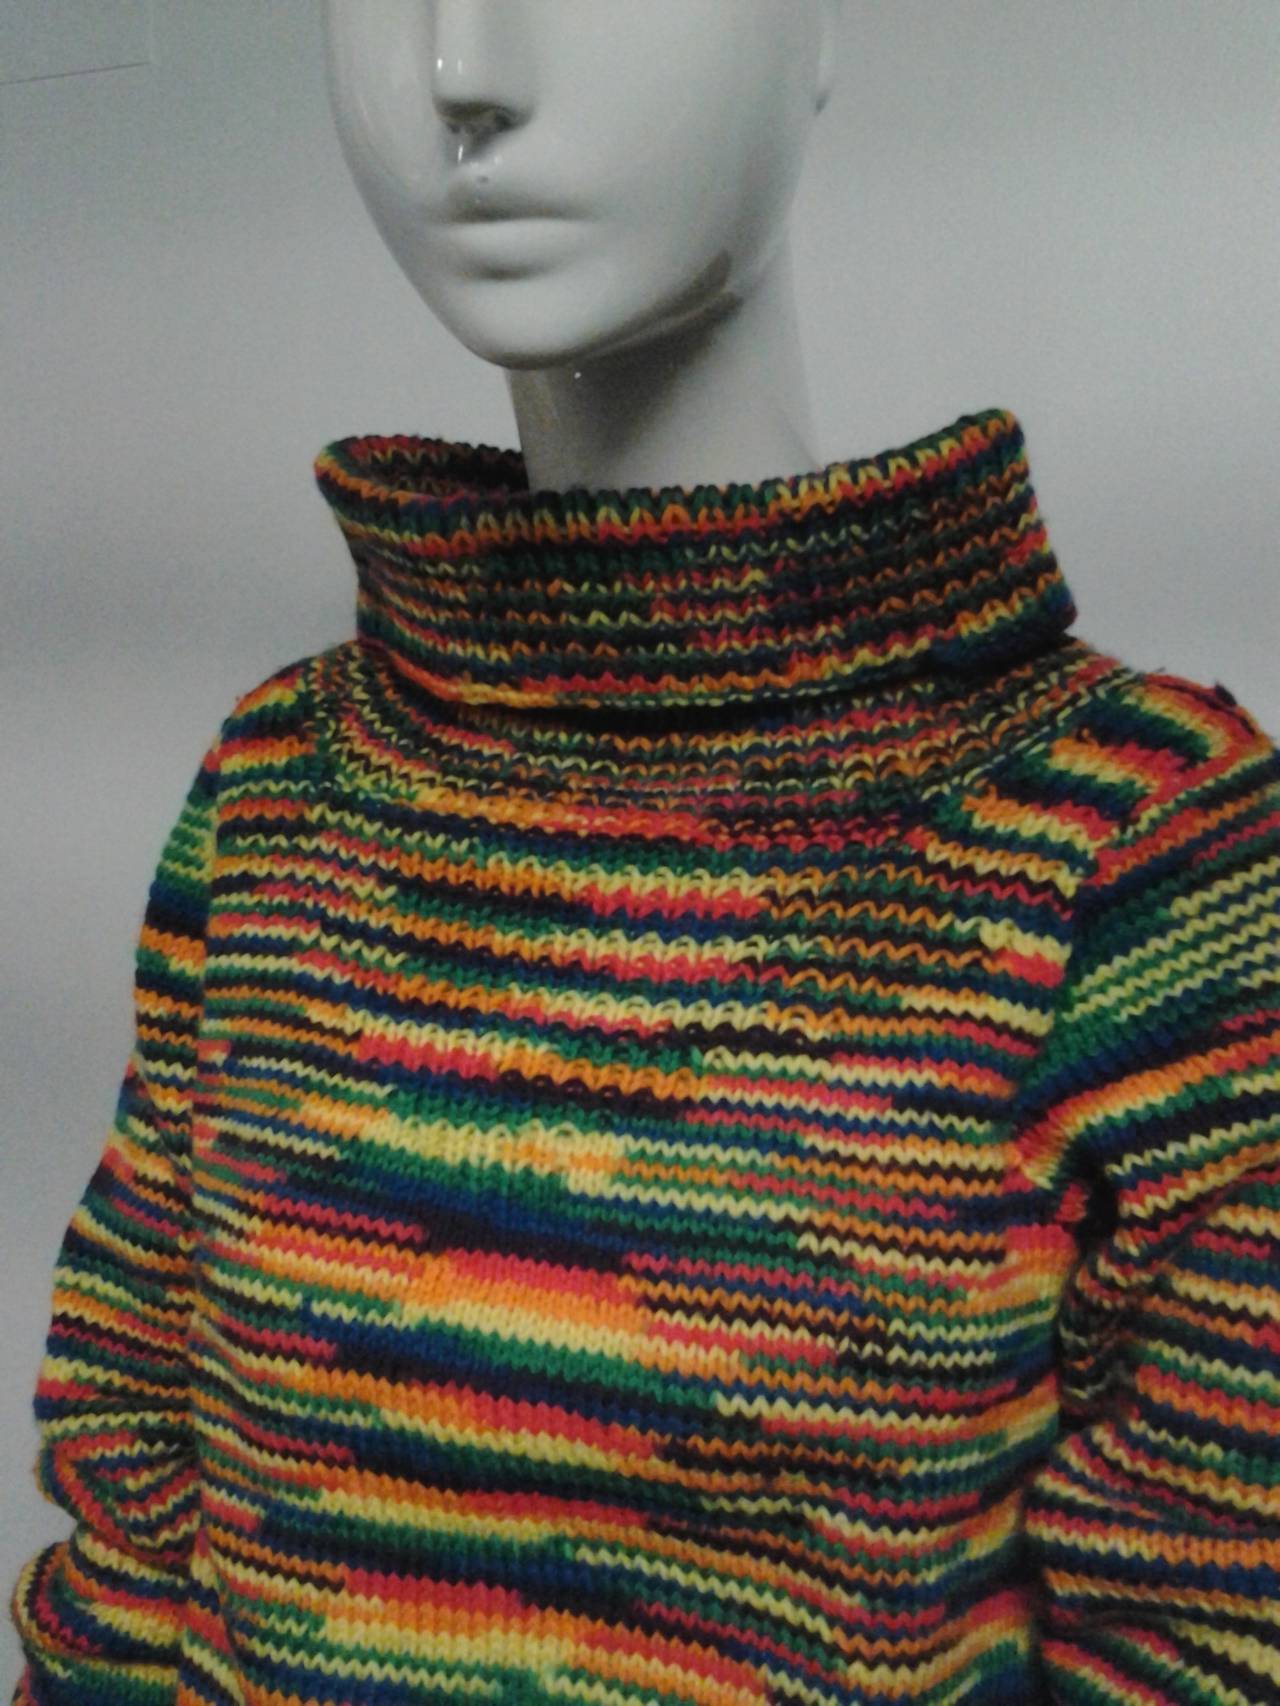 An adorable American hand-knit pullover sweater in rainbow yarn:  Funnel neck, cropped hem and matching mittens.